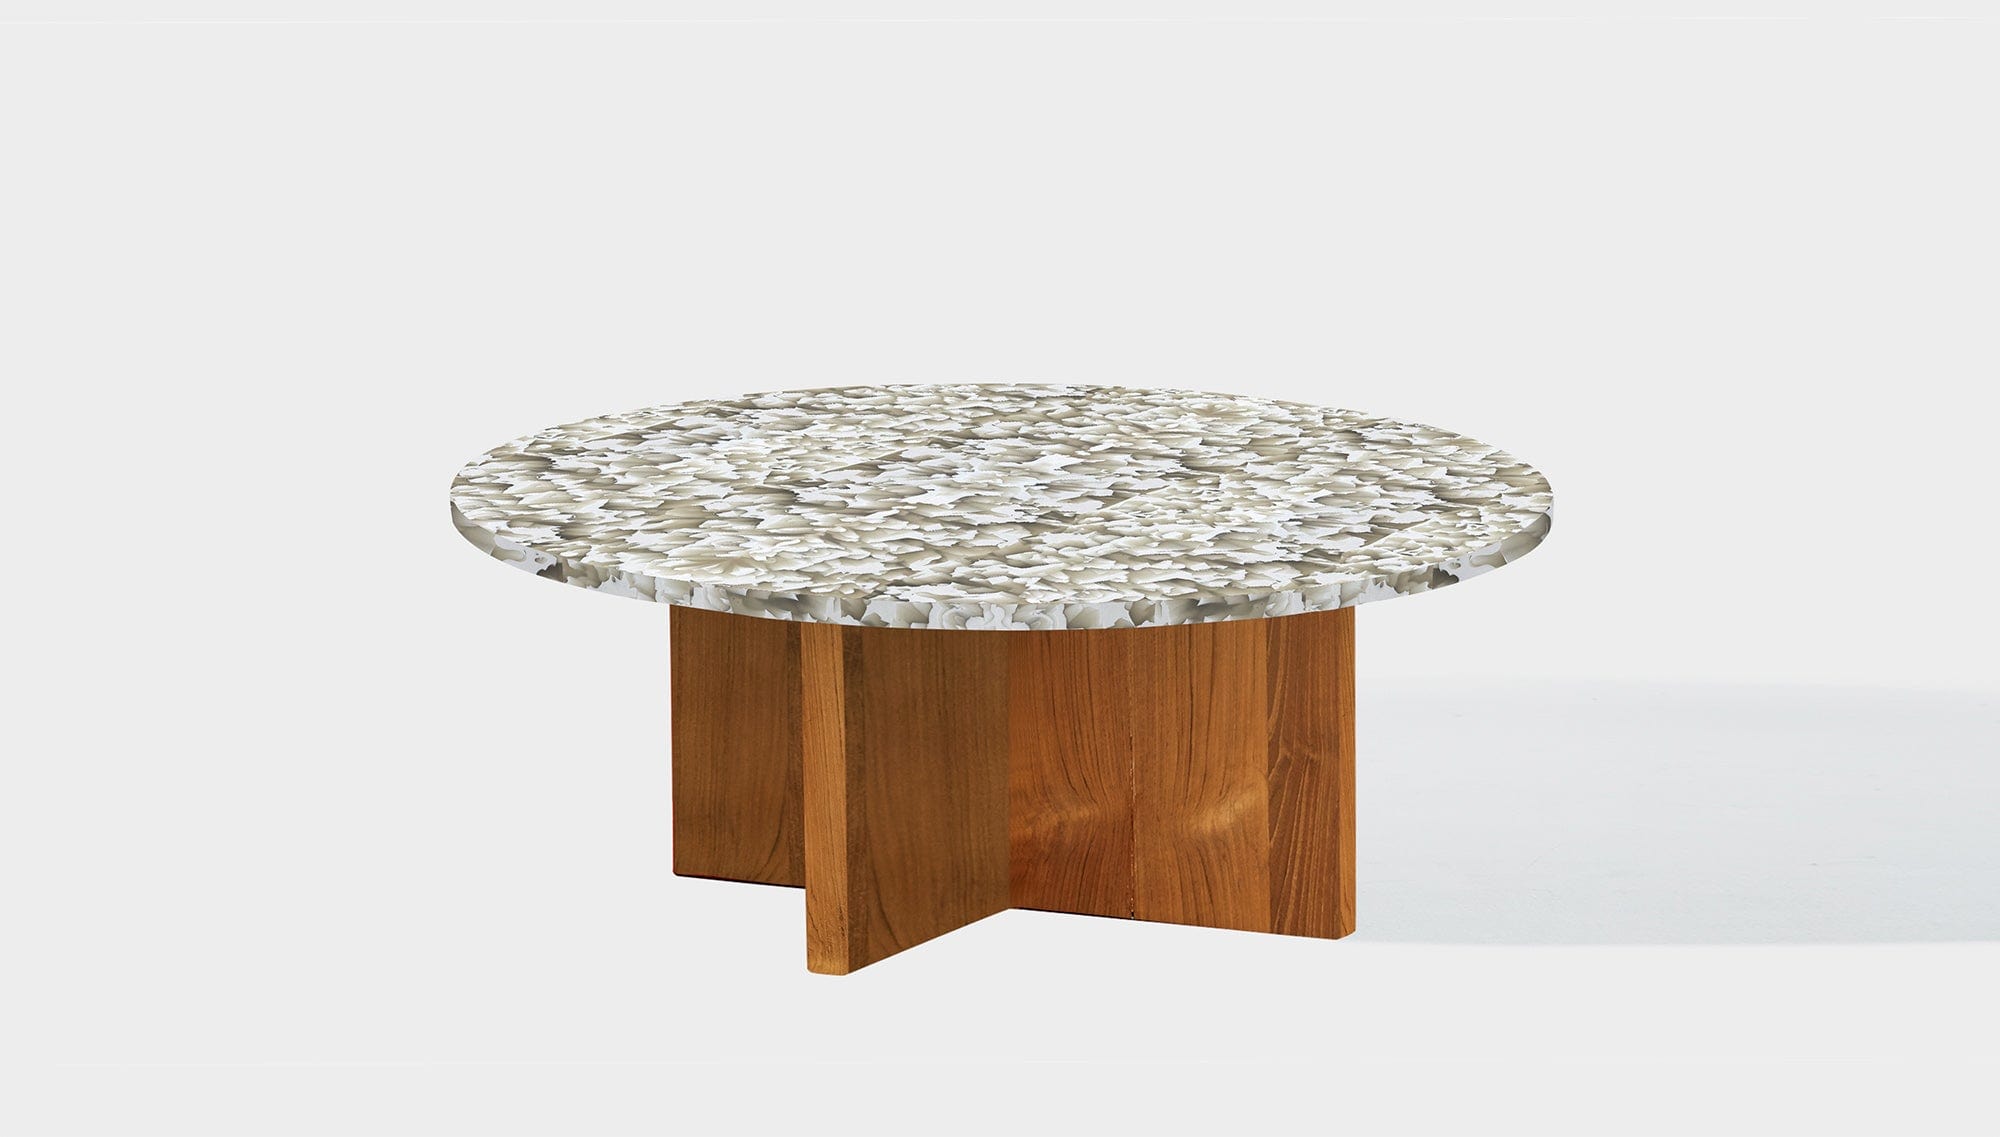 reddie-raw round side table 90dia x 35H *cm / Recycled bottle tops~Pearl / Solid Reclaimed Wood Teak~Teak Natural Bob Coffee Table Round- Recycled Bottle Tops